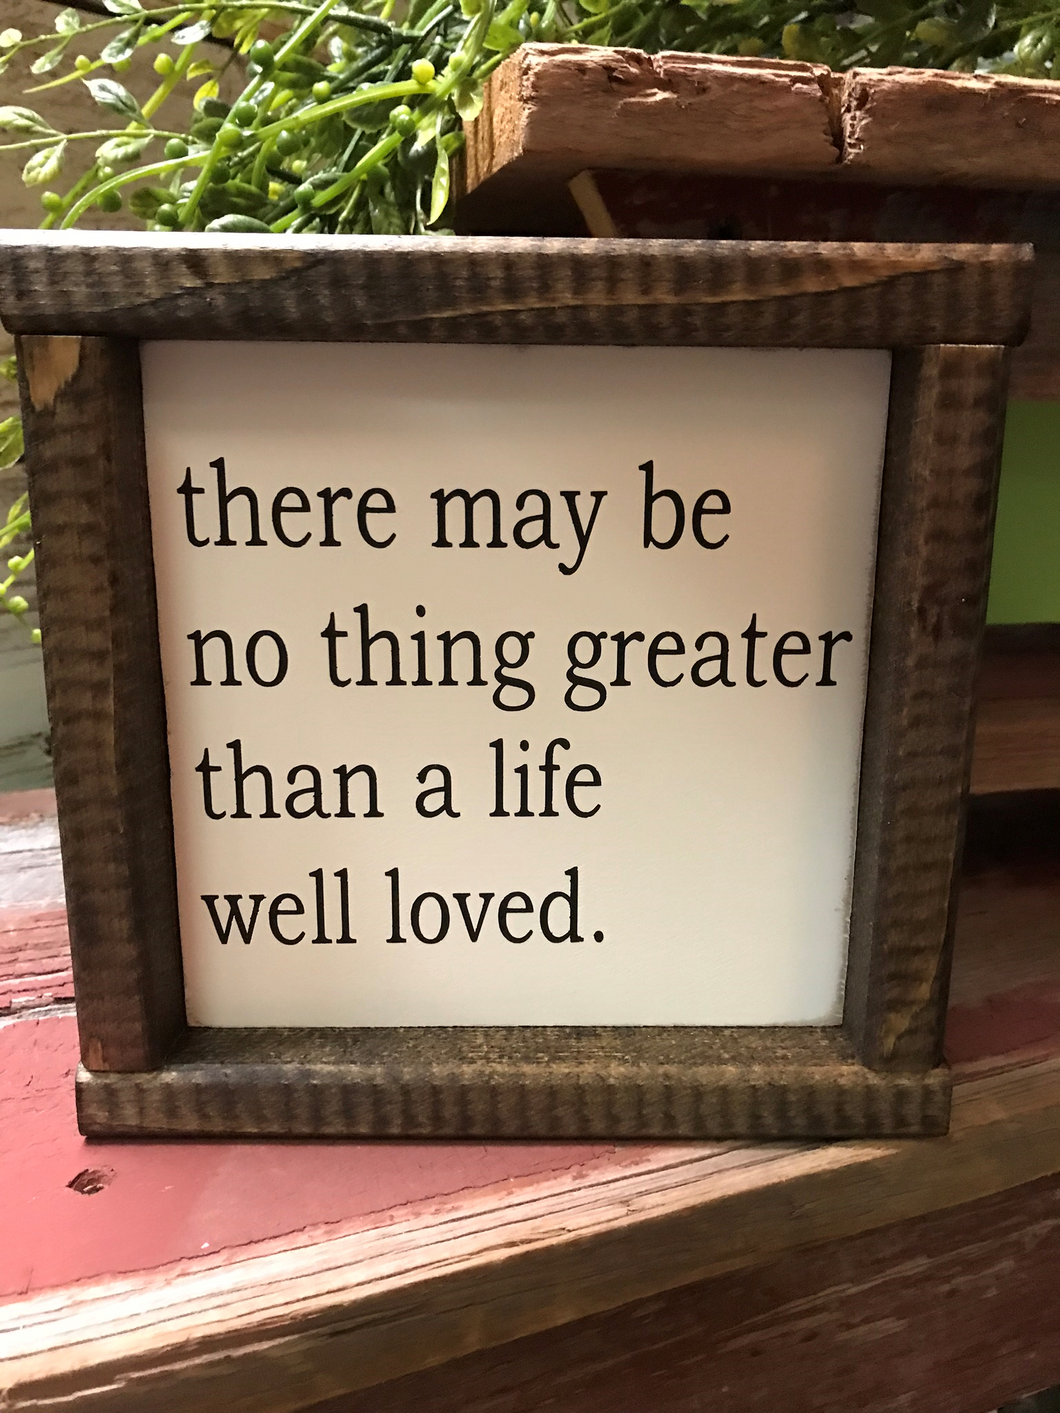 There may be no thing greater than a life well loved